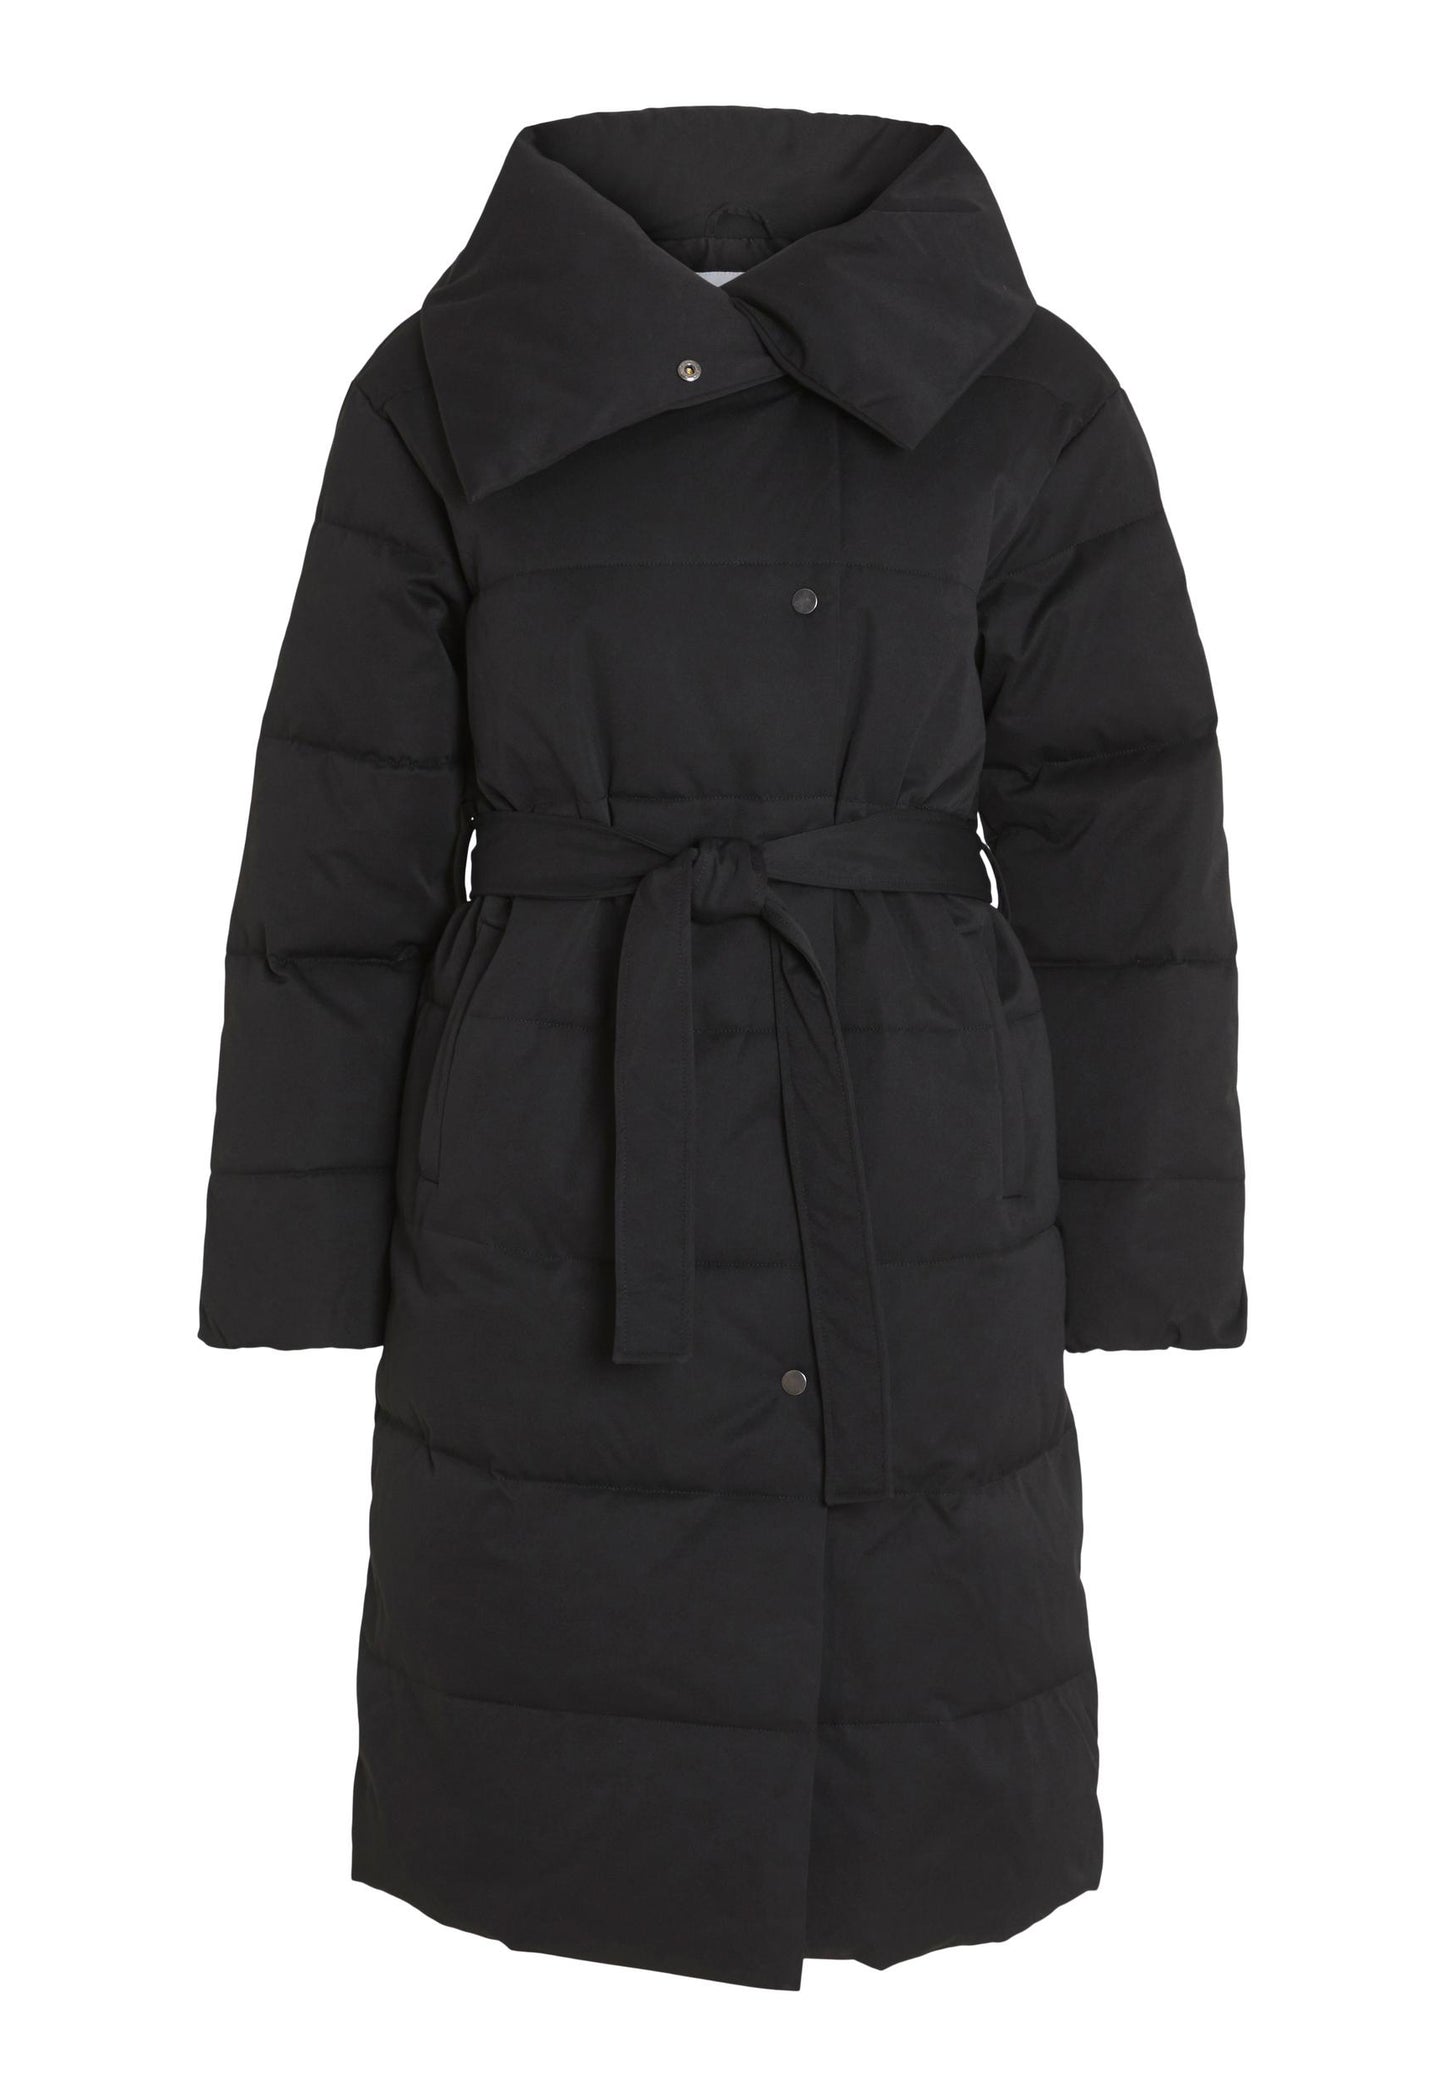 
                  
                    VILA Sulitana Midi Longline Belted Puffer Coat with Shawl Collar in Black - One Nation Clothing
                  
                